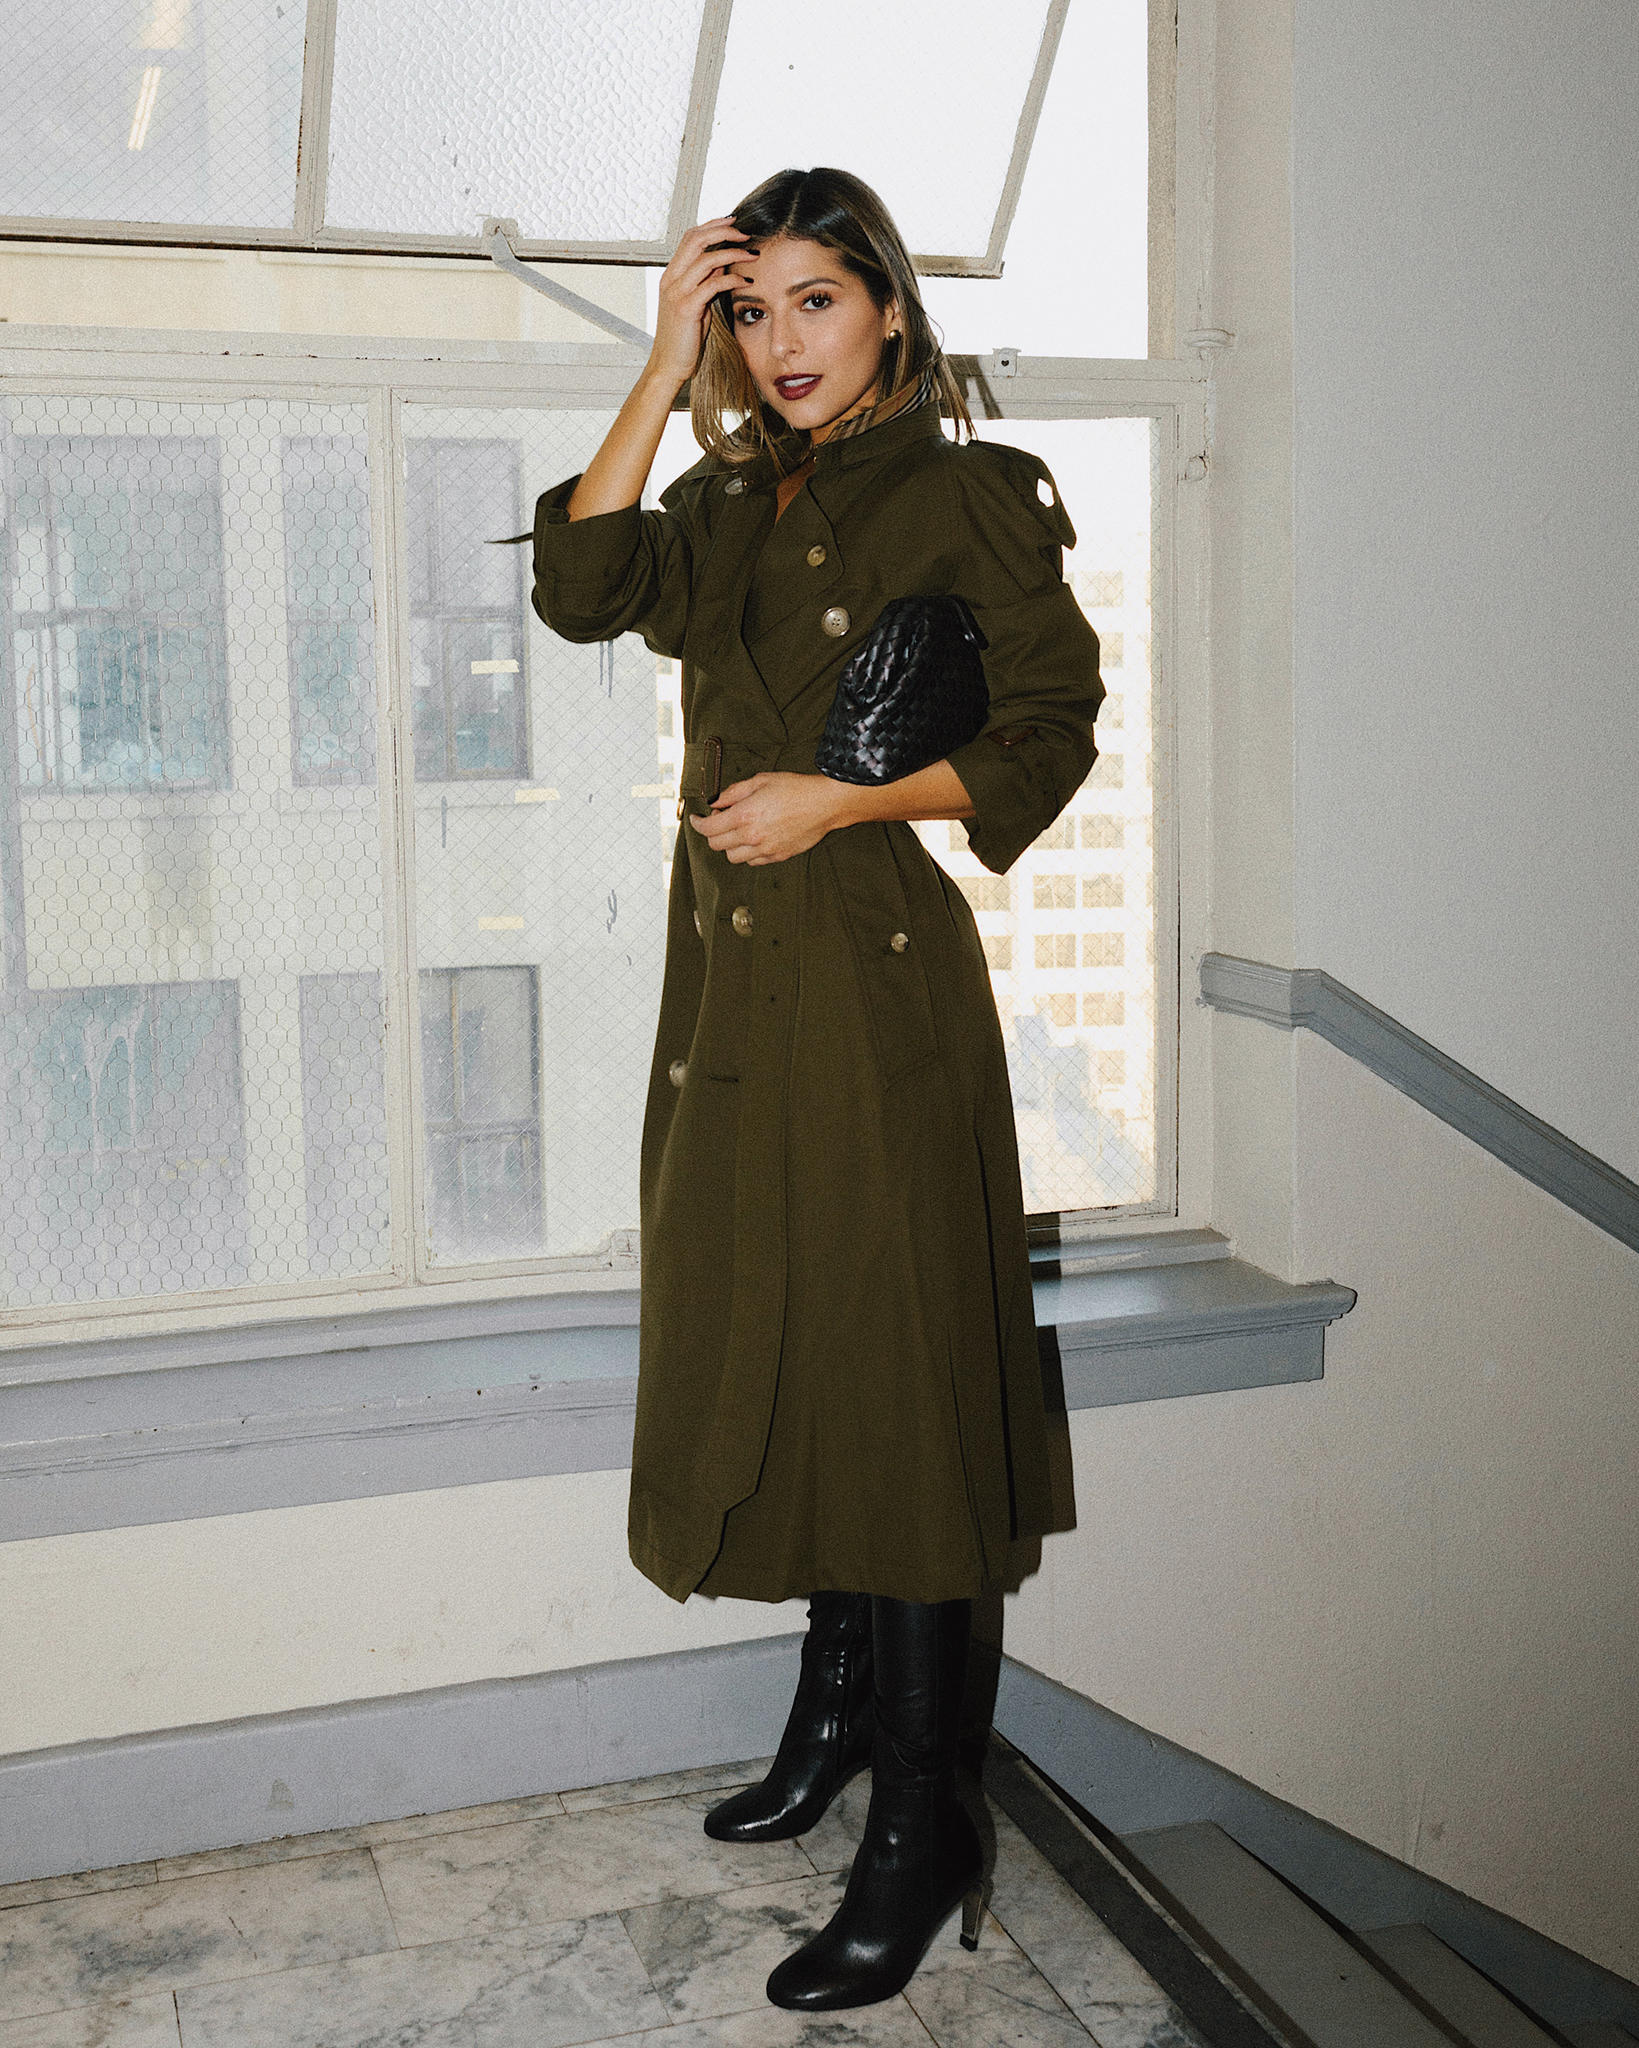 Must-Have Spring Jackets by Pam Hetlinger | Thegirlfrompanama.com | burberry trench coat, olive green burberry trench, trench coat and boots